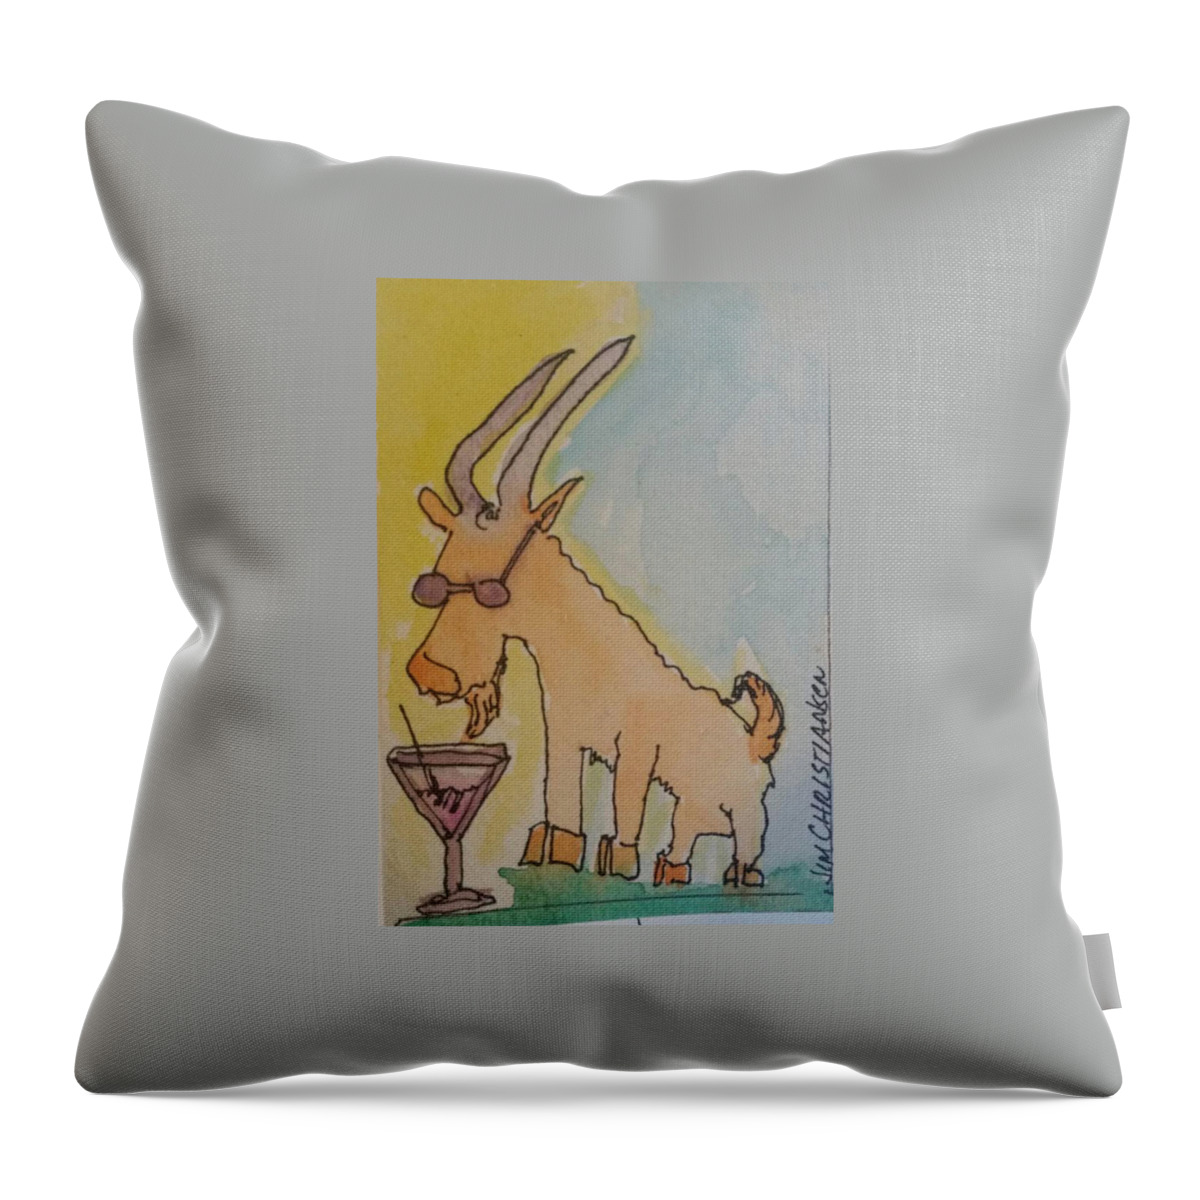 Martini Throw Pillow featuring the painting Martini Goat by James Christiansen